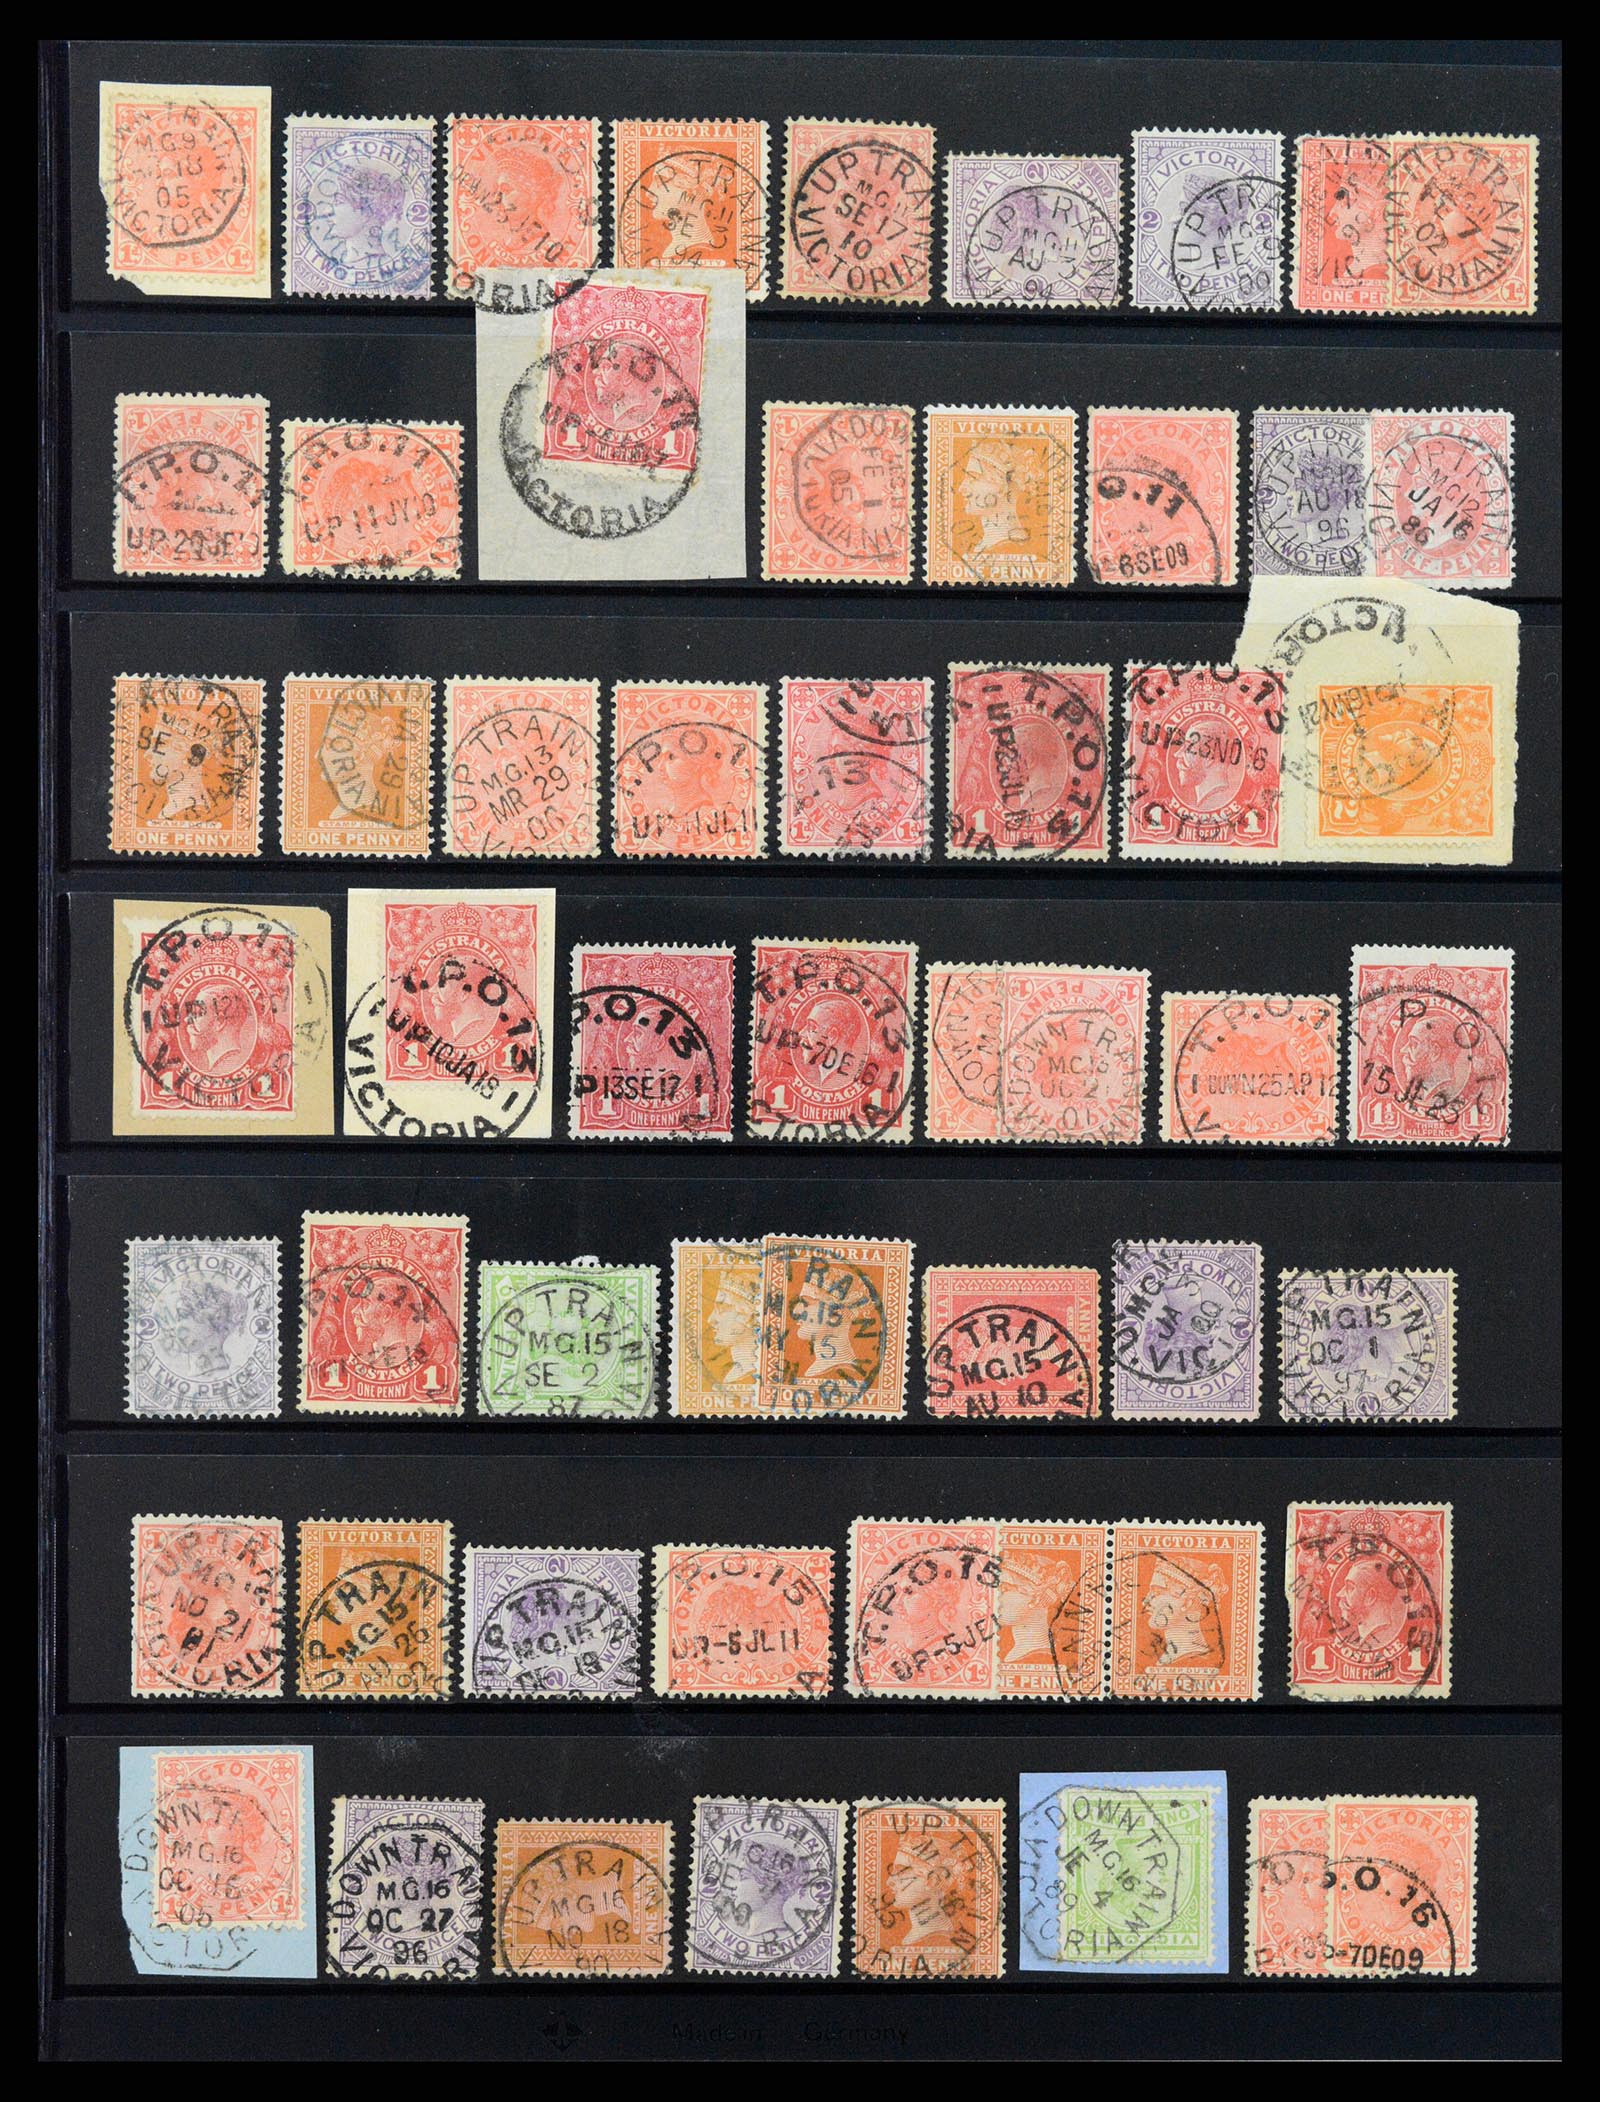 37514 031 - Stamp collection 37514 Victoria tpo cancellations 1865-1930.